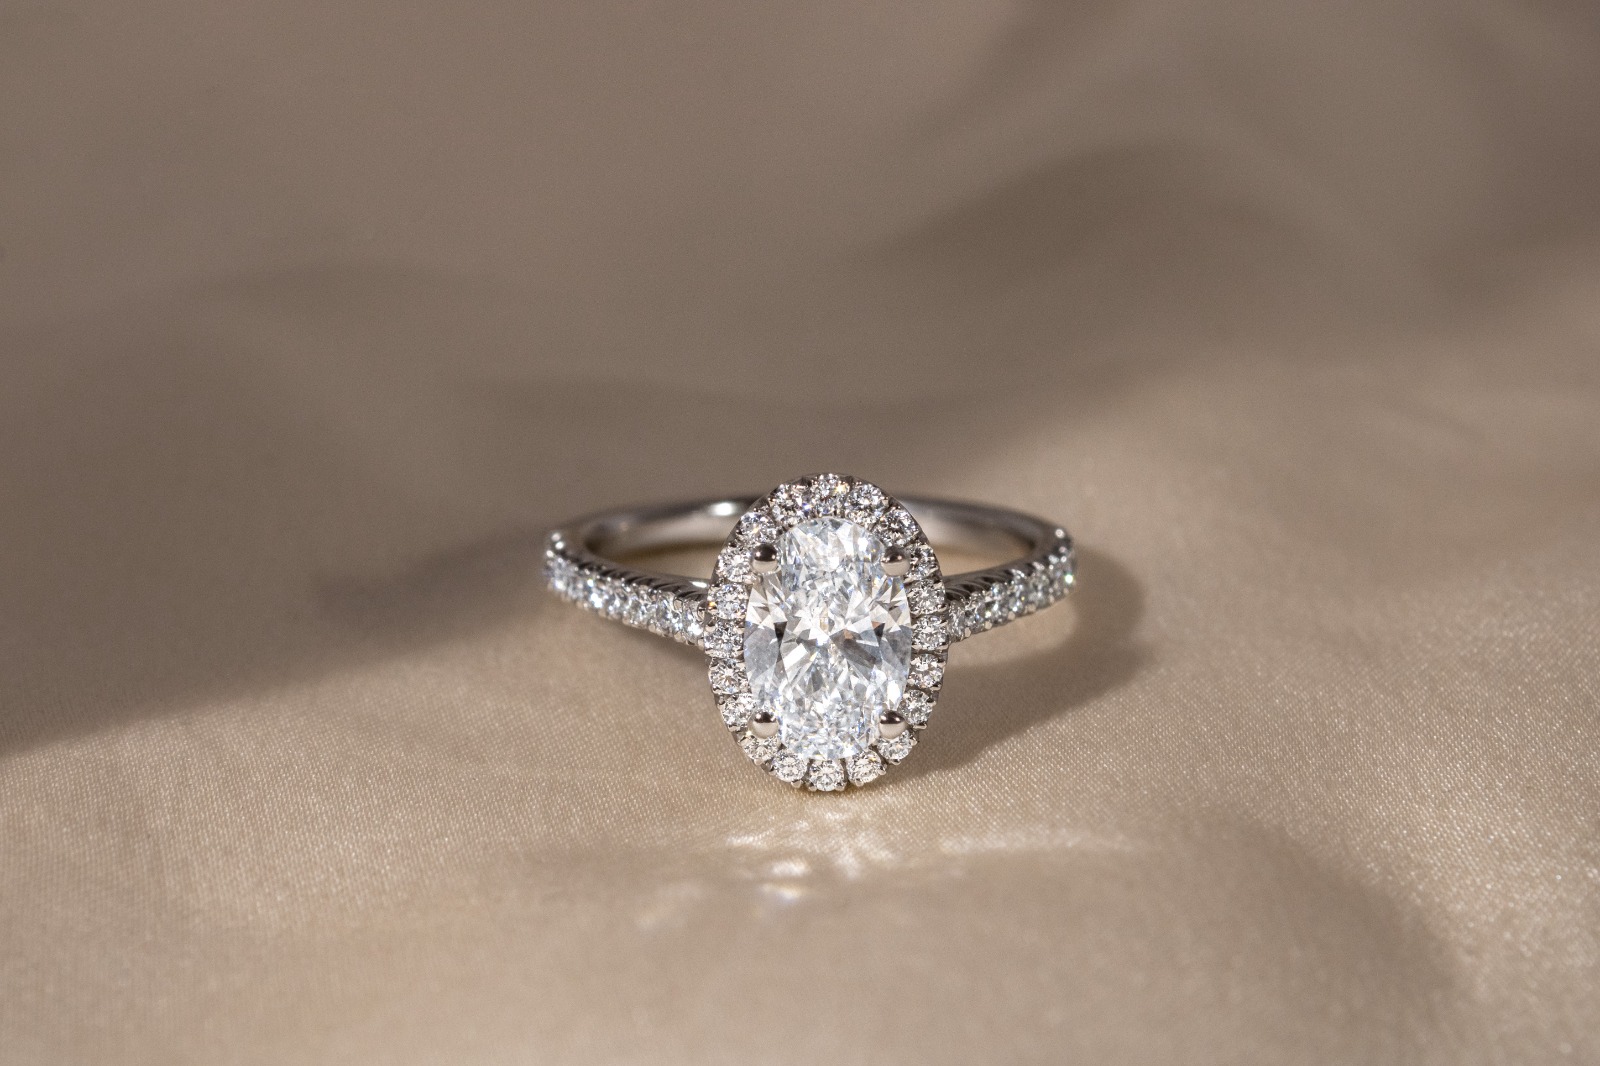 The 3 Carat Oval Lab Grown Diamond Ring: A Combination of Class and Strength.